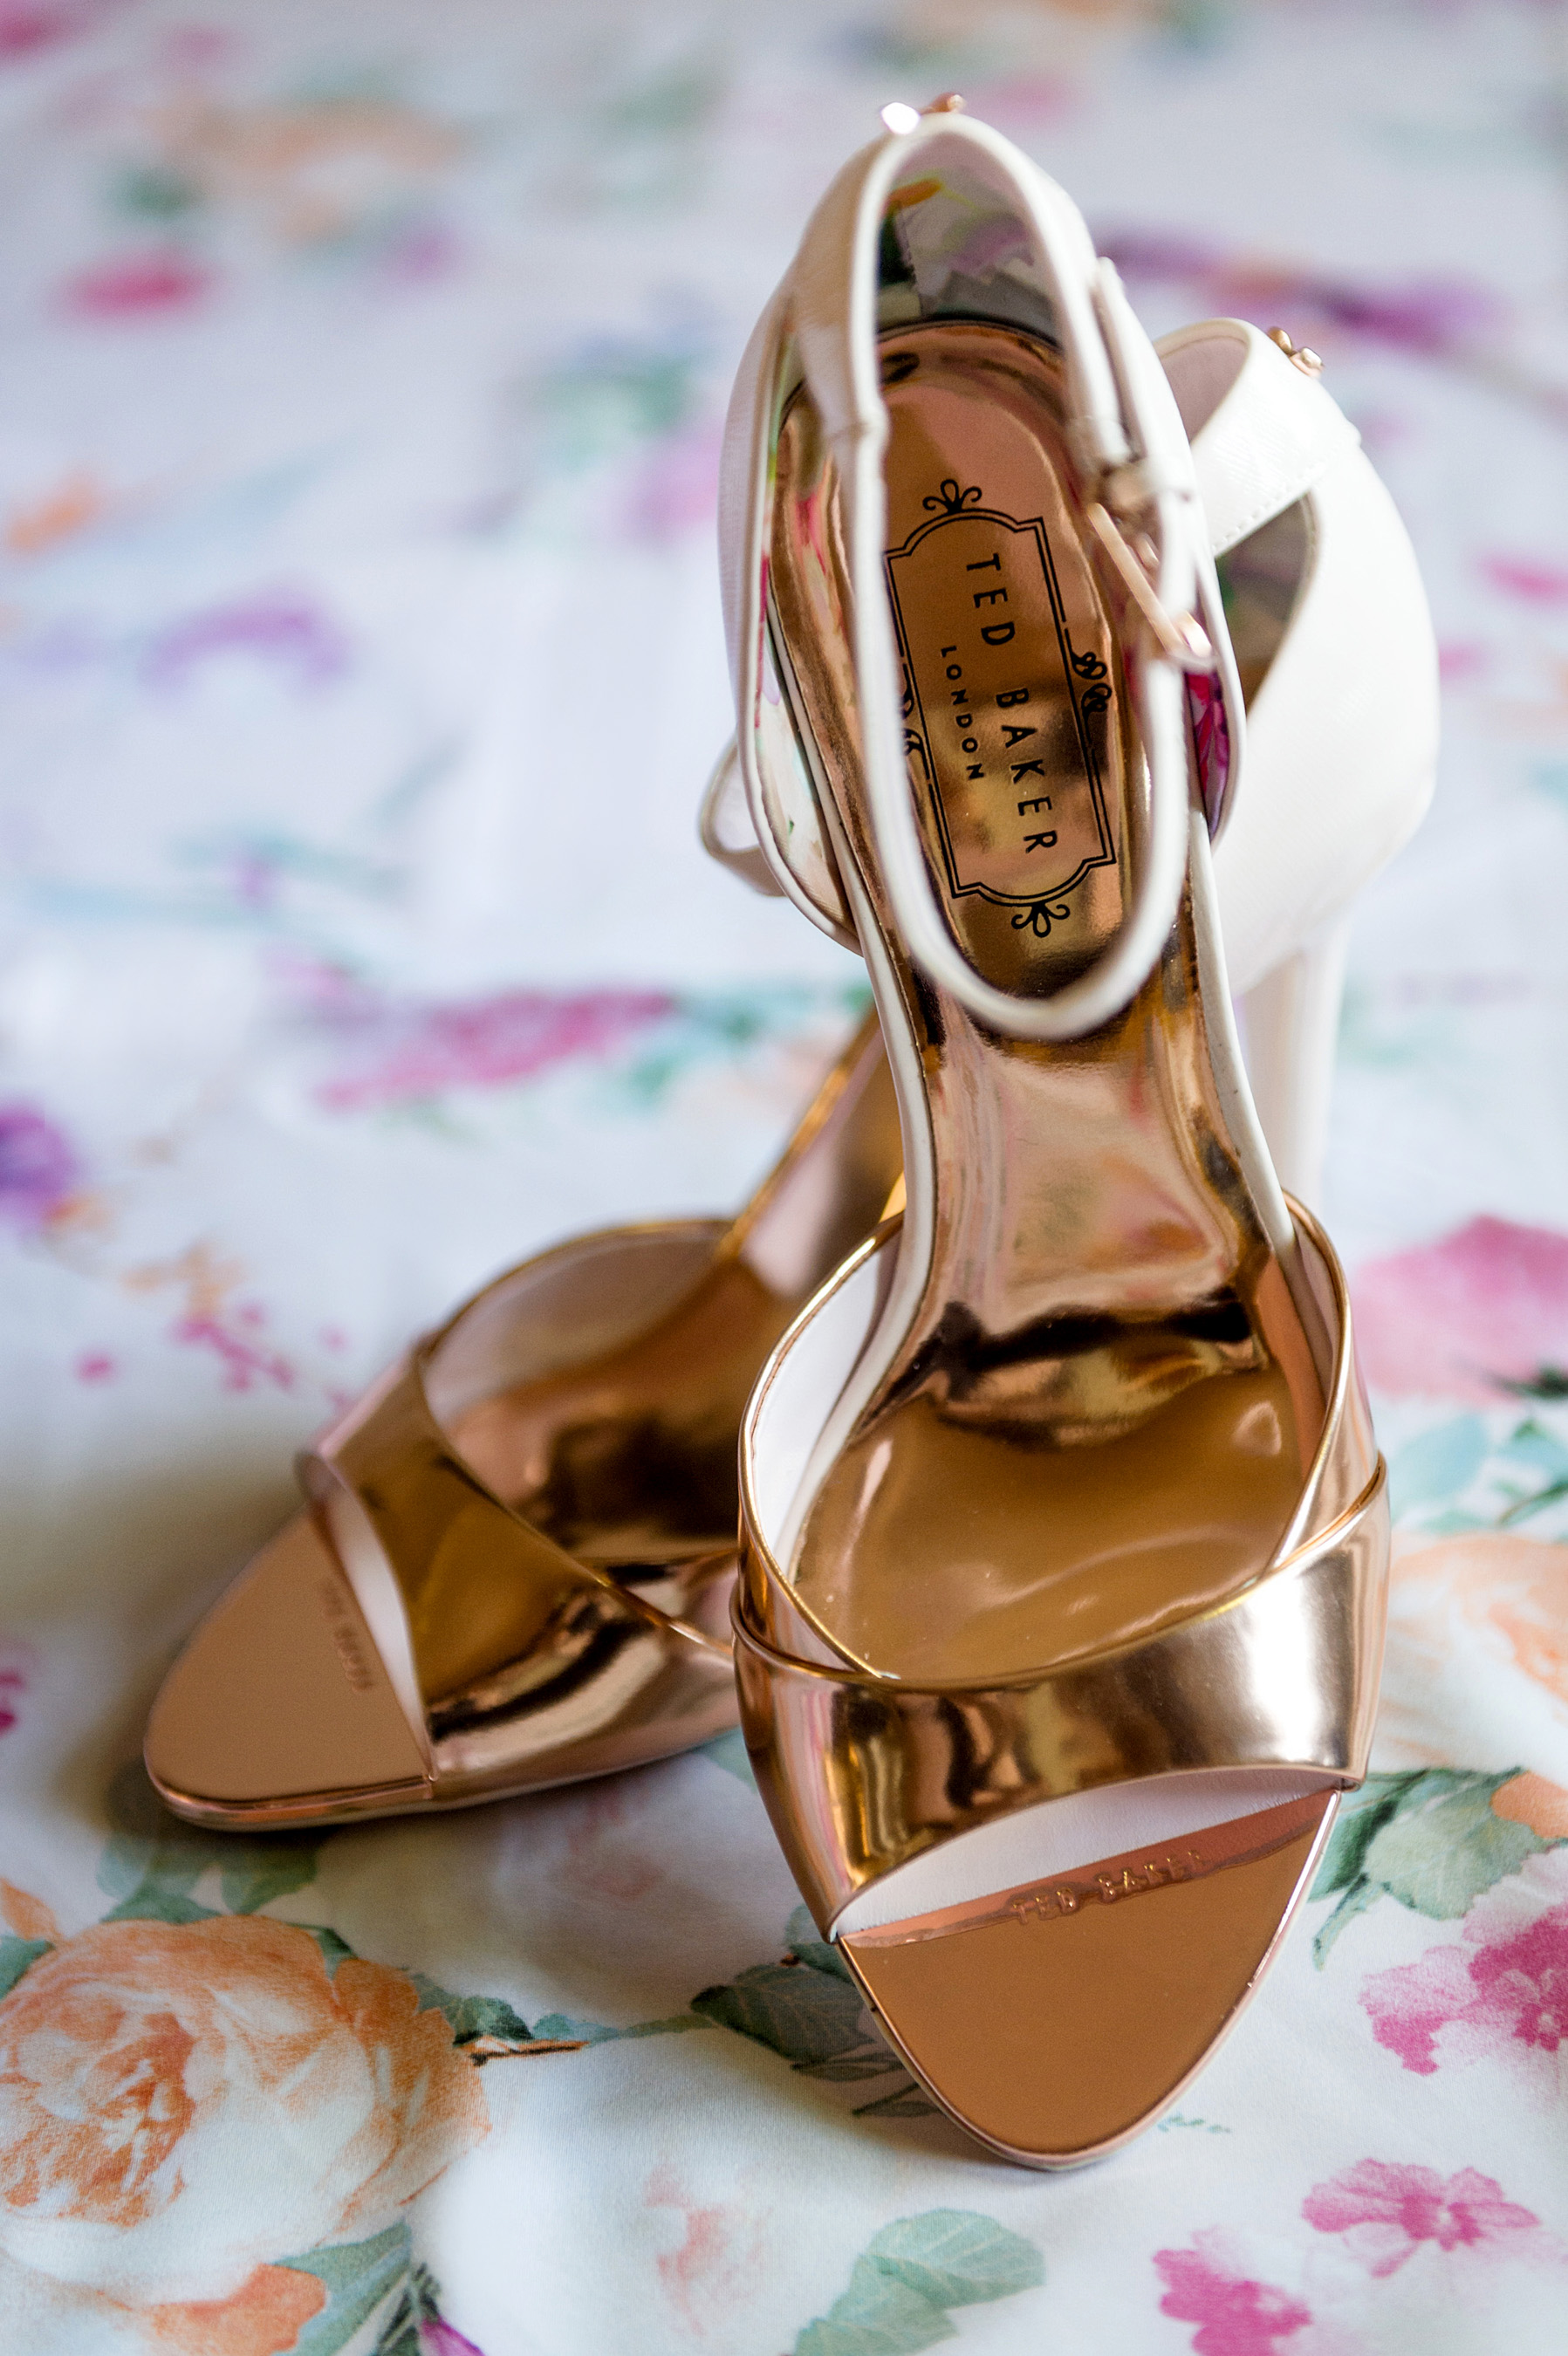 photo of ted baker bridal shoes by ashley fisher photography